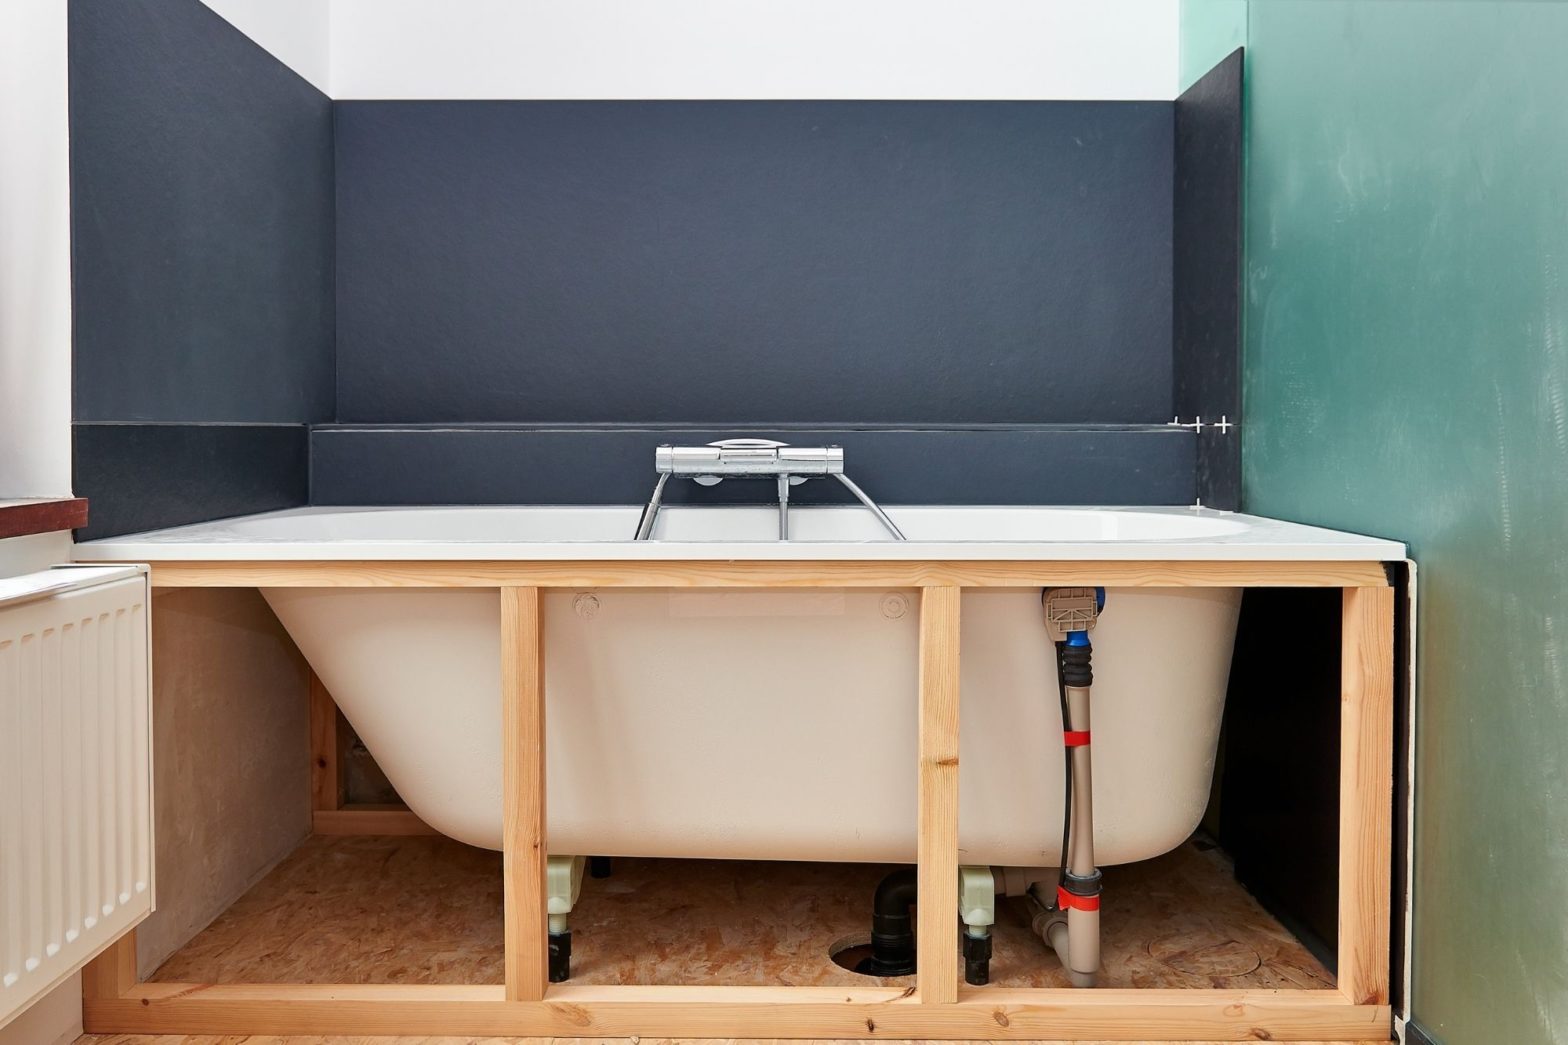 Doing a Complete Bath Remodel on Your Existing Bathroom May Require Electrical and Plumbing Work.